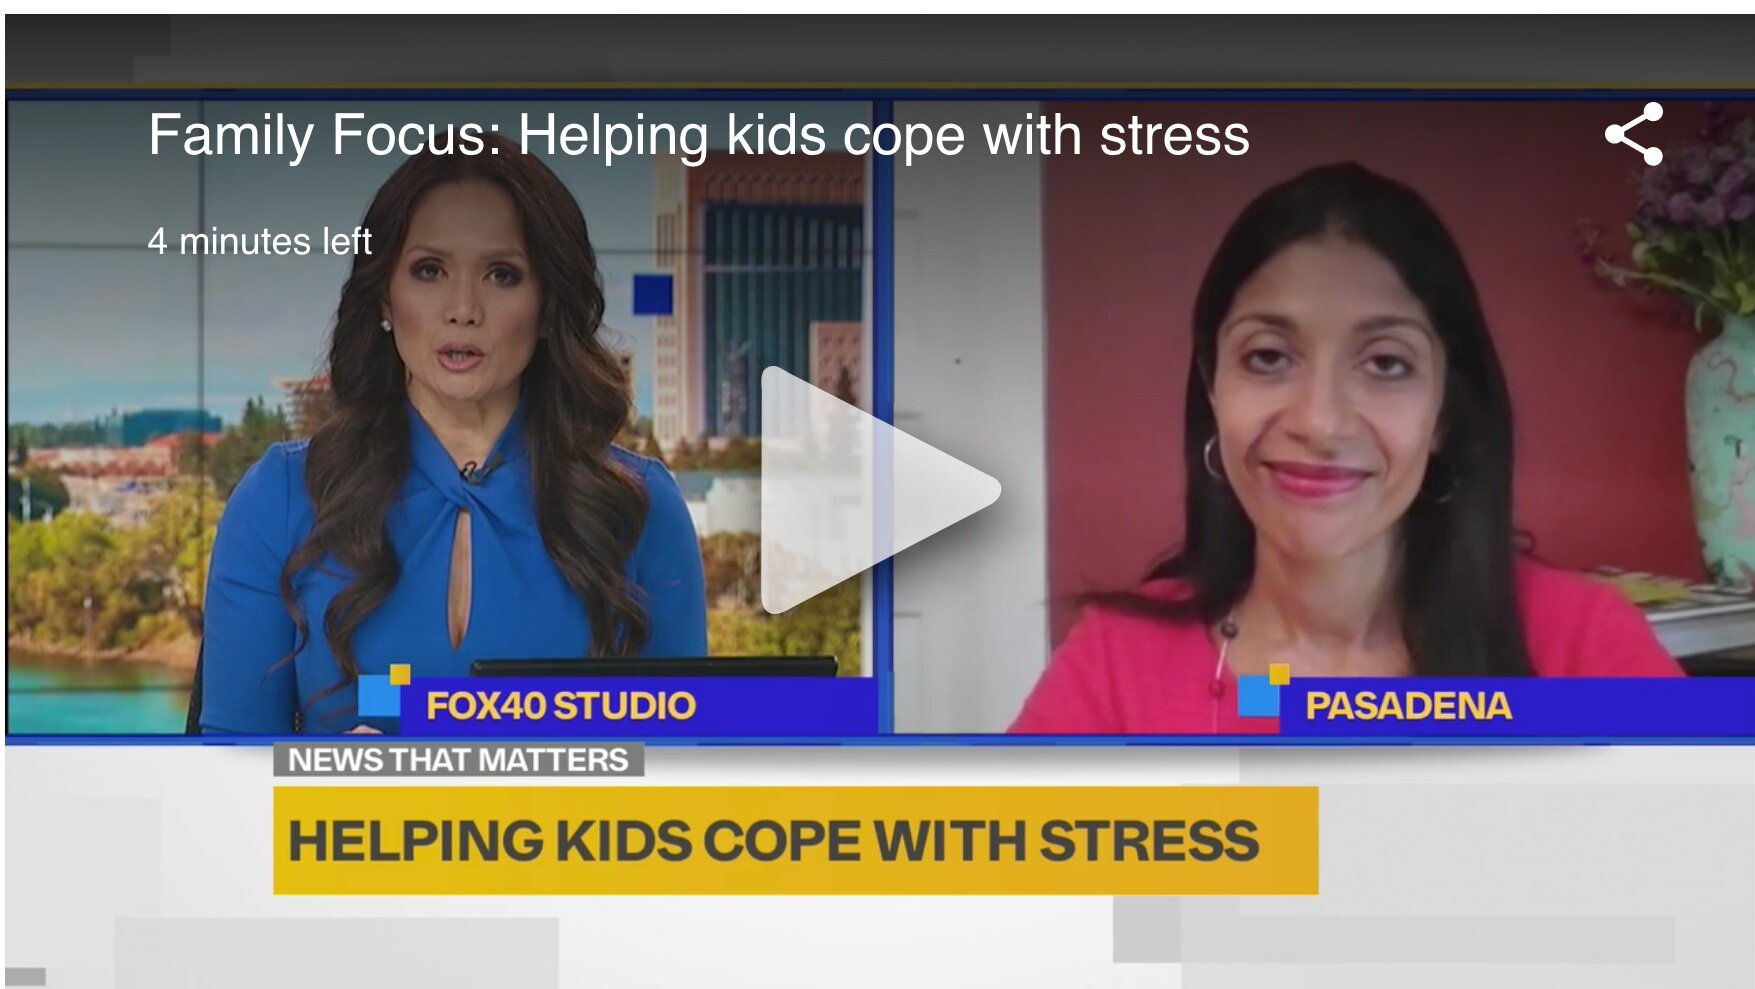 Family Focus: Helping Kids Cope with Stress